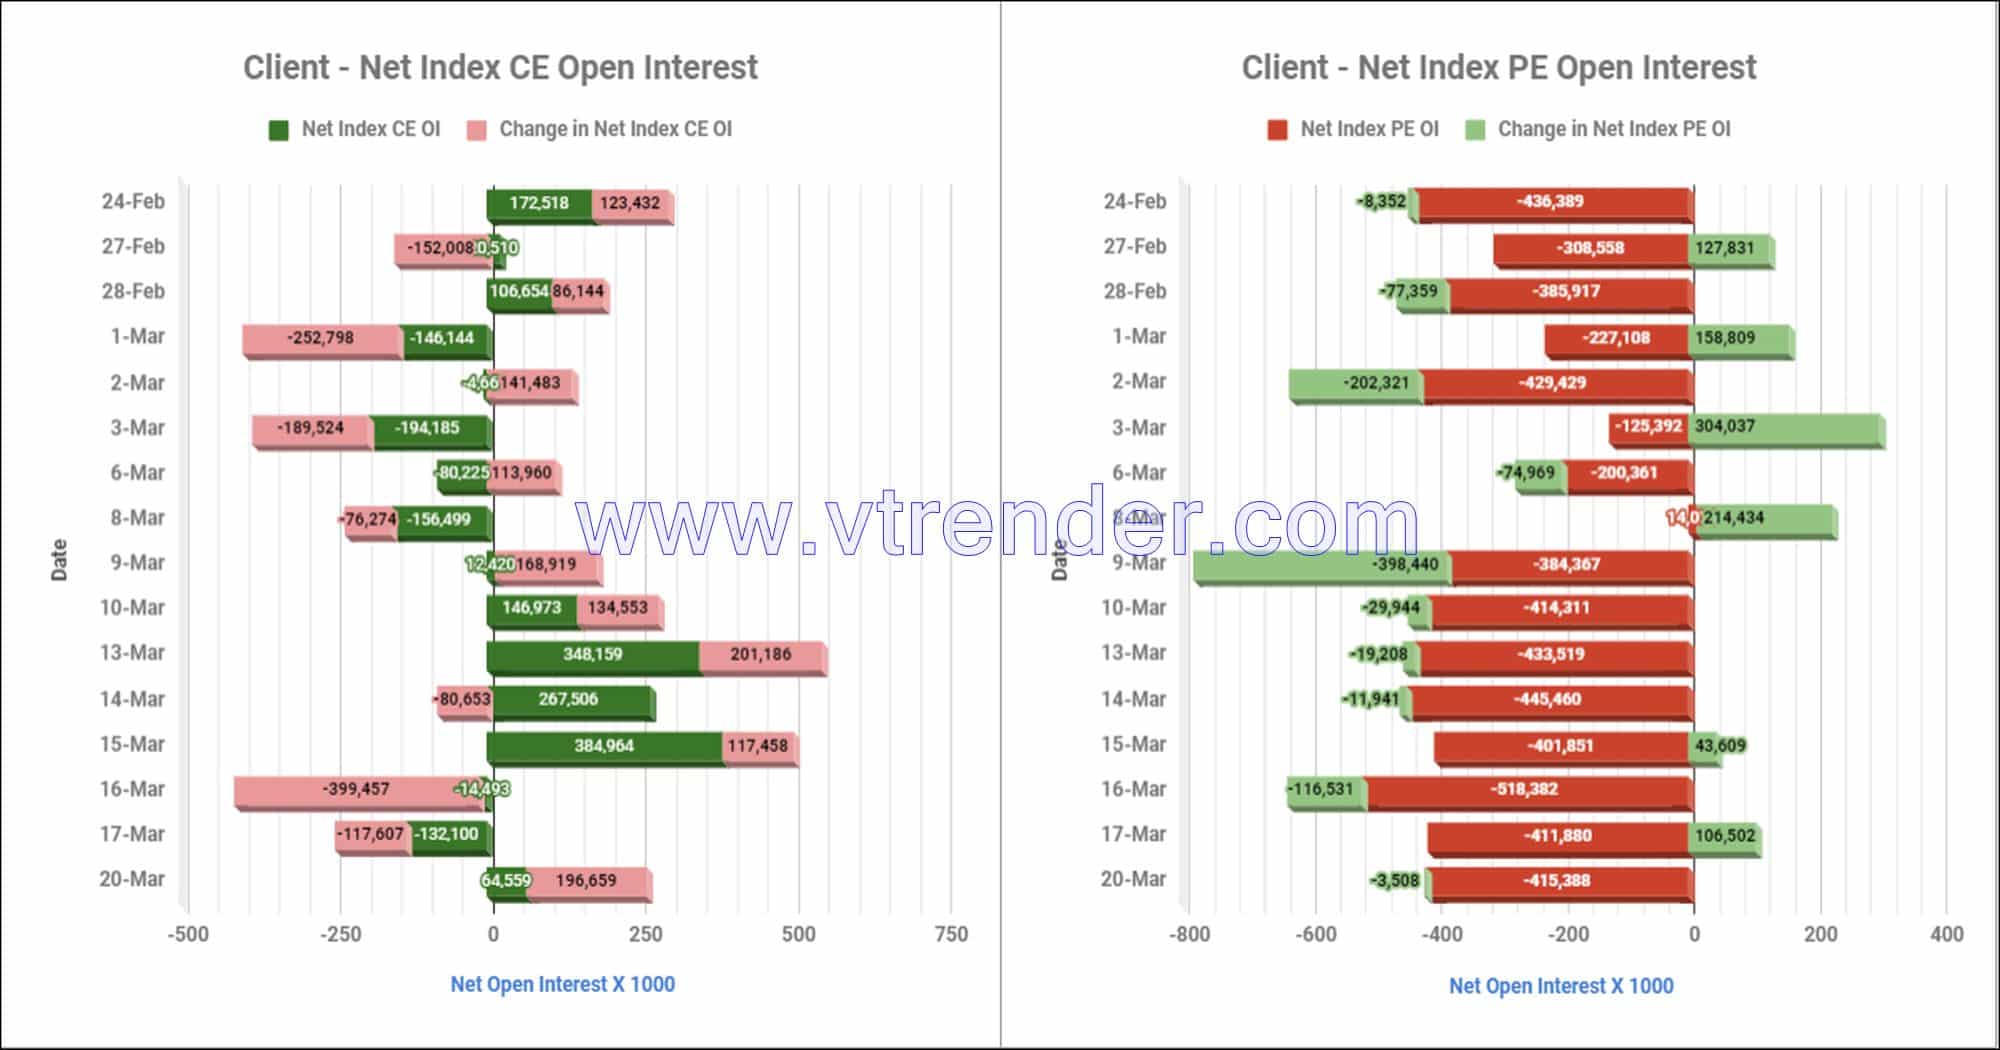 Clientinop20Mar Participantwise Net Open Interest And Net Equity Investments – 20Th Mar 2023 Client, Equity, Fii, Index Futures, Index Options, Open Interest, Prop